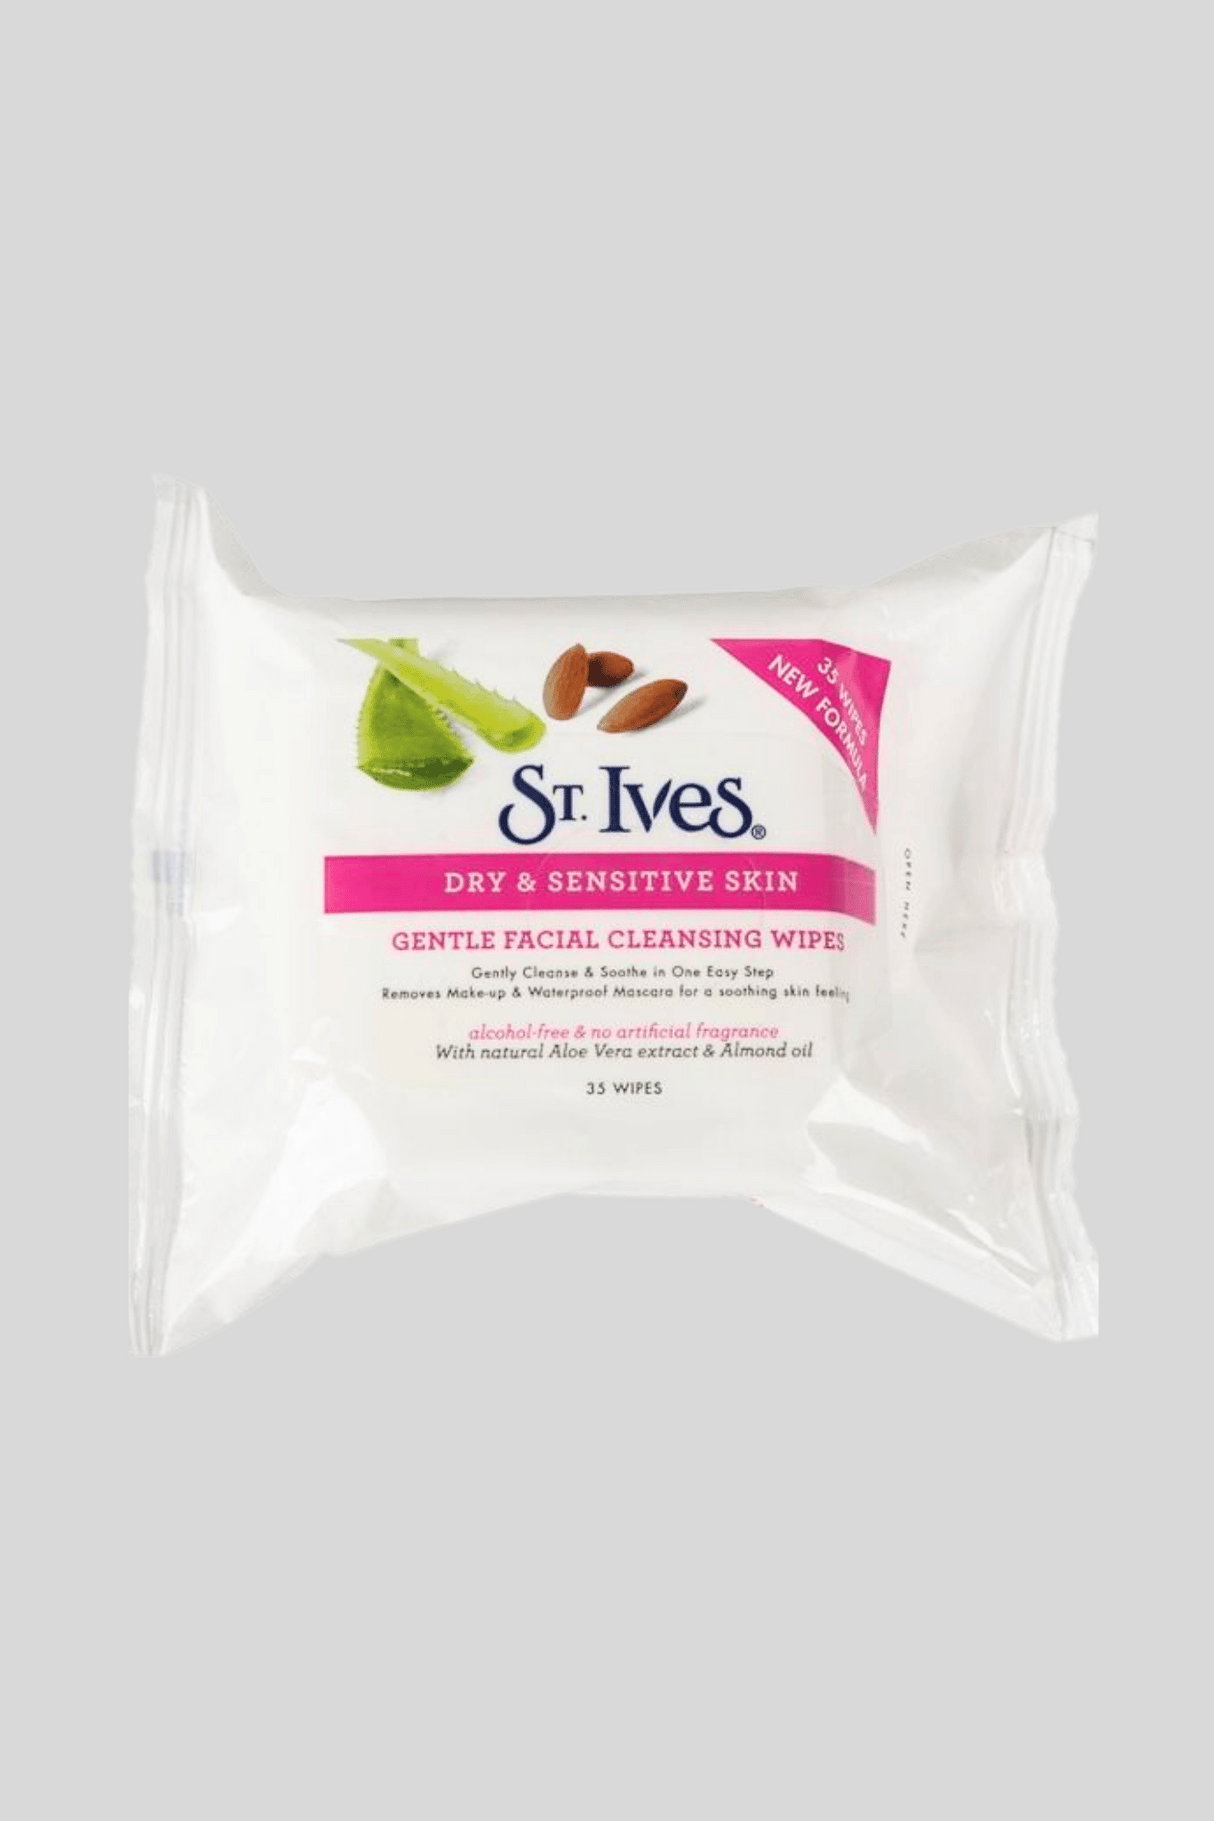 stives facial cleansing wipes